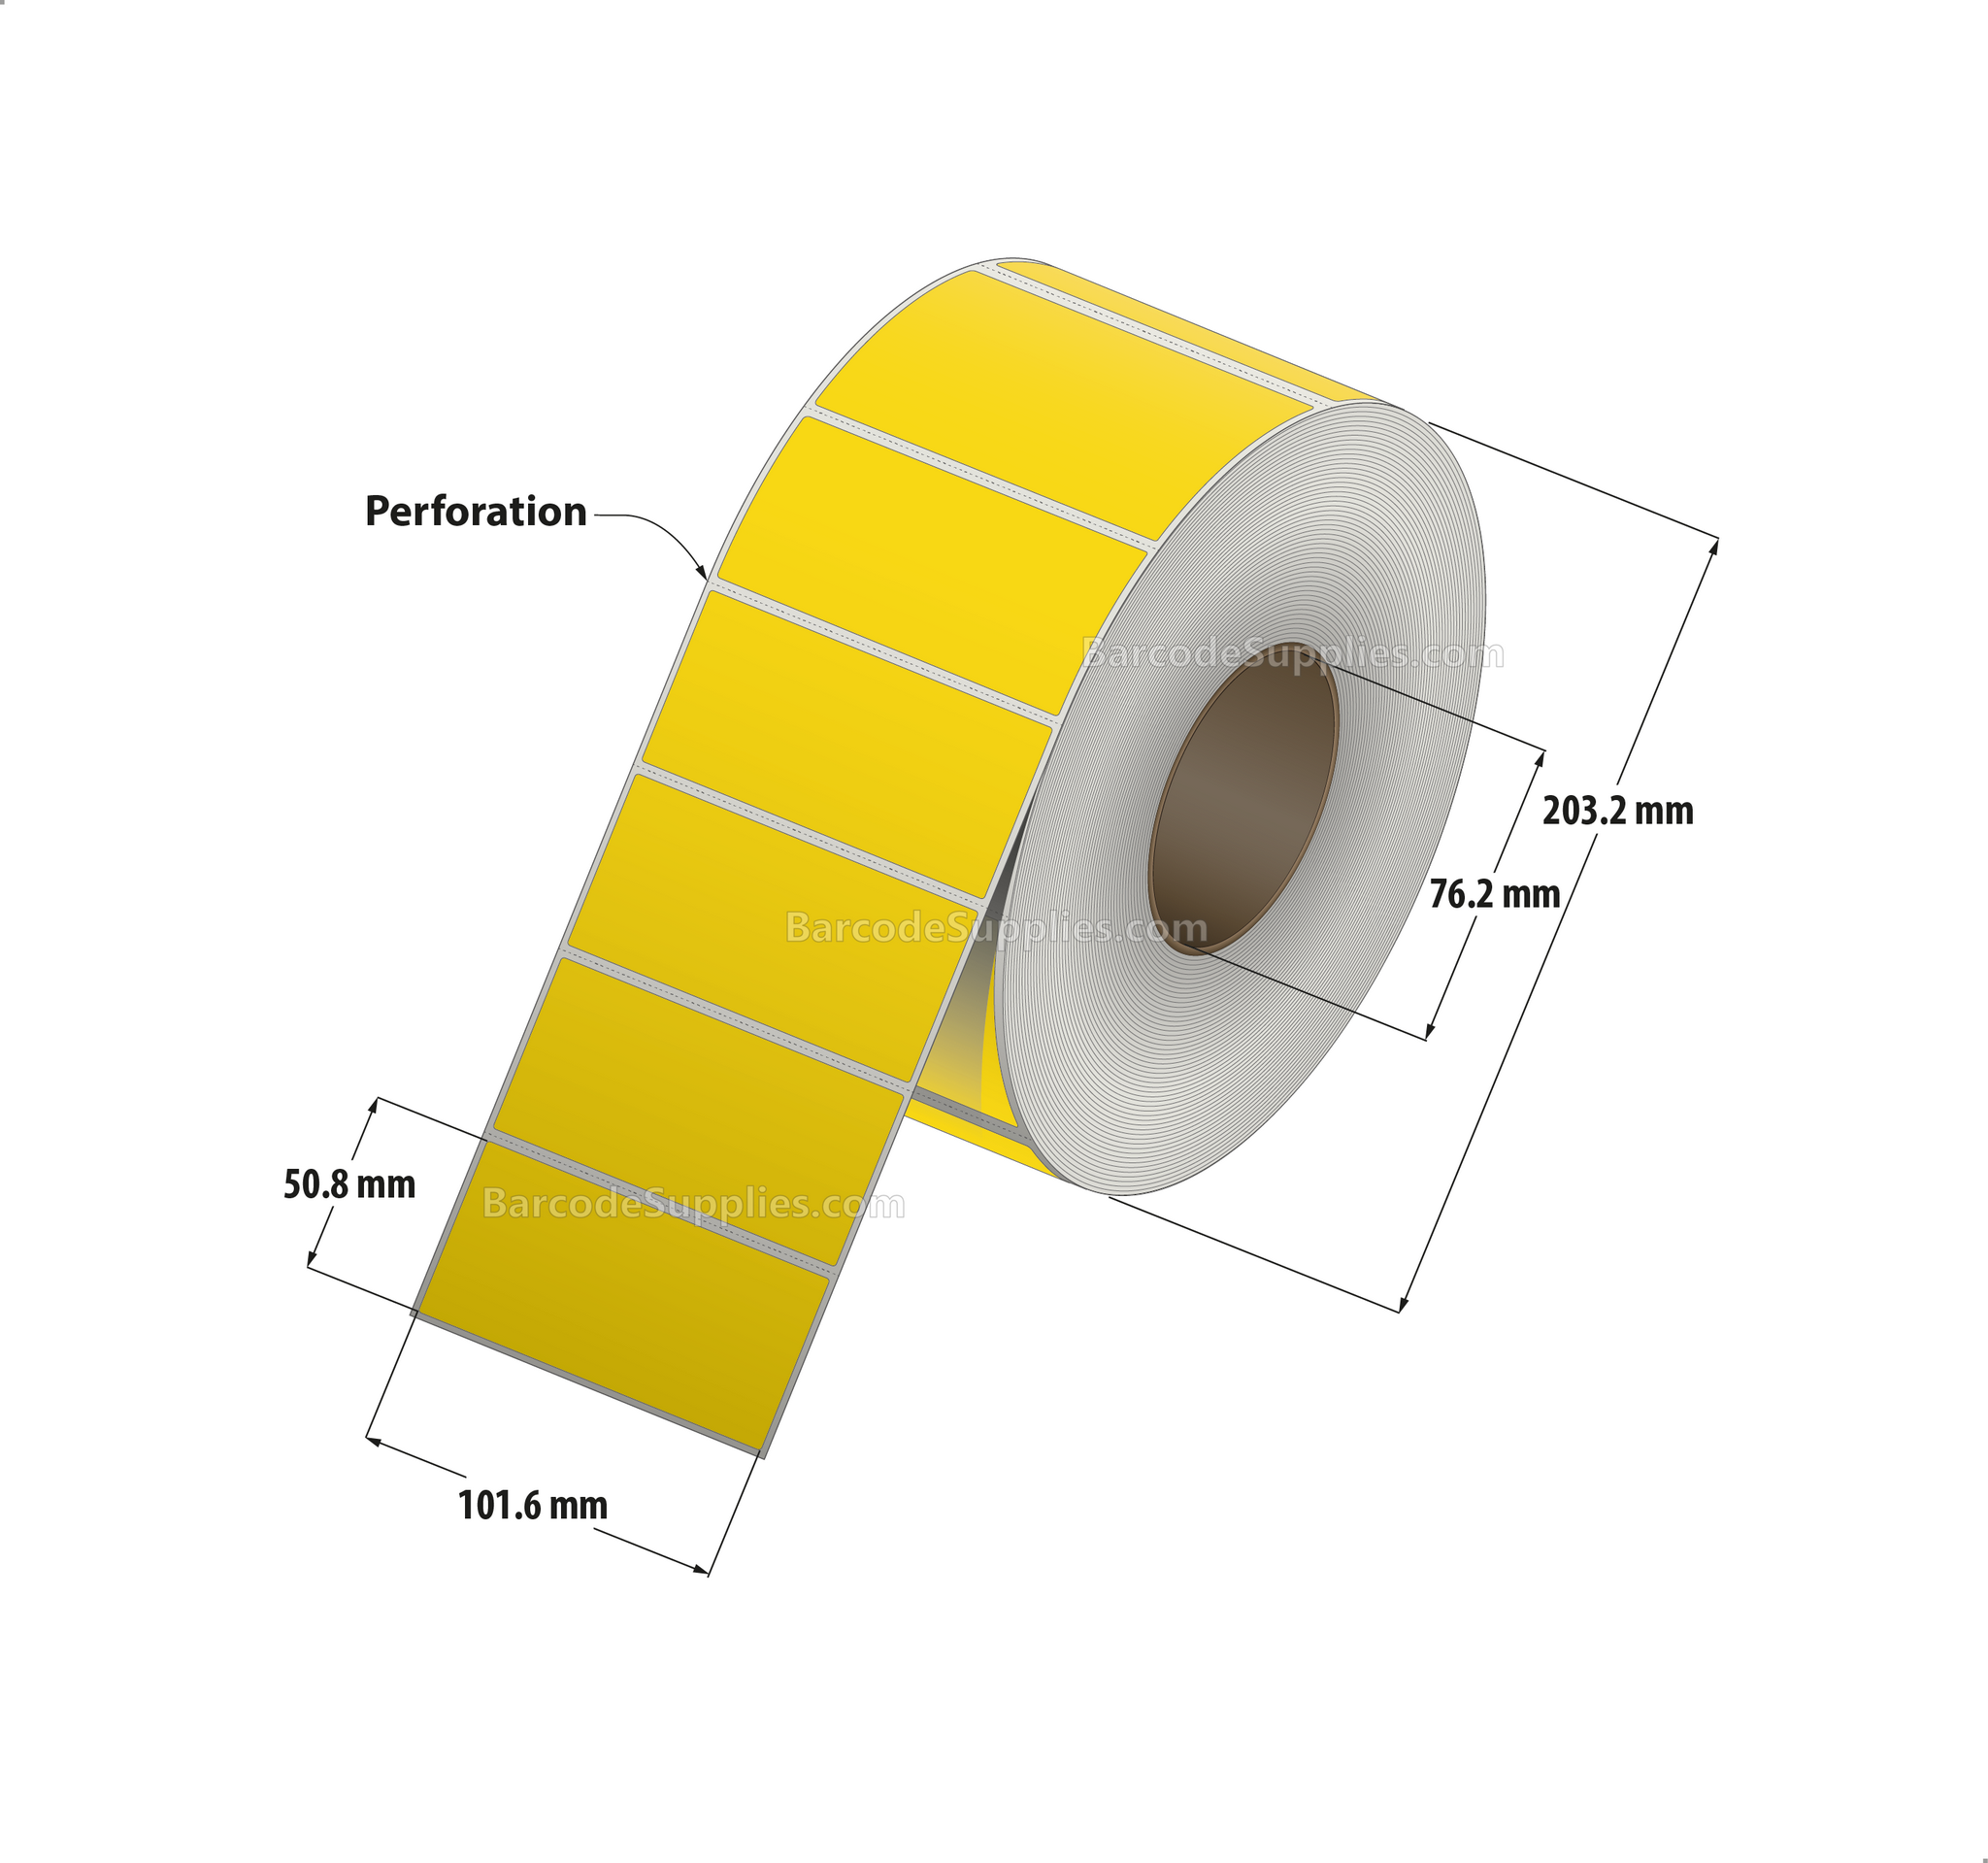 4 x 2 Thermal Transfer Pantone Yellow Labels With Permanent Acrylic Adhesive - Perforated - 3000 Labels Per Roll - Carton Of 4 Rolls - 12000 Labels Total - MPN: TH42-1PY